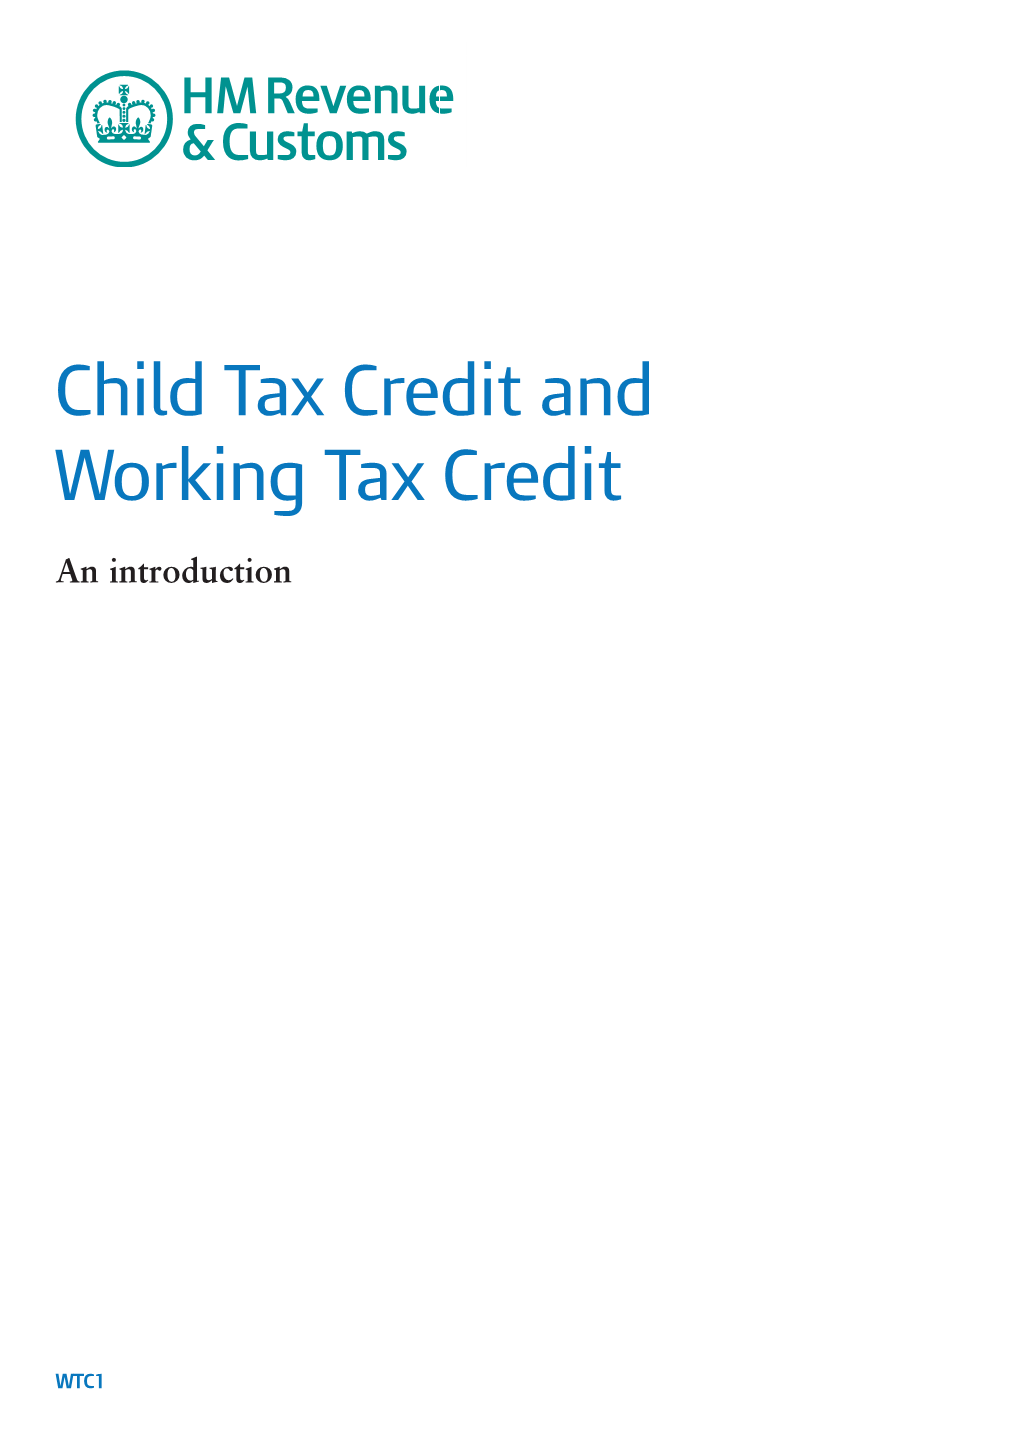 WTC1 Child Tax Credit and Working Tax Credit